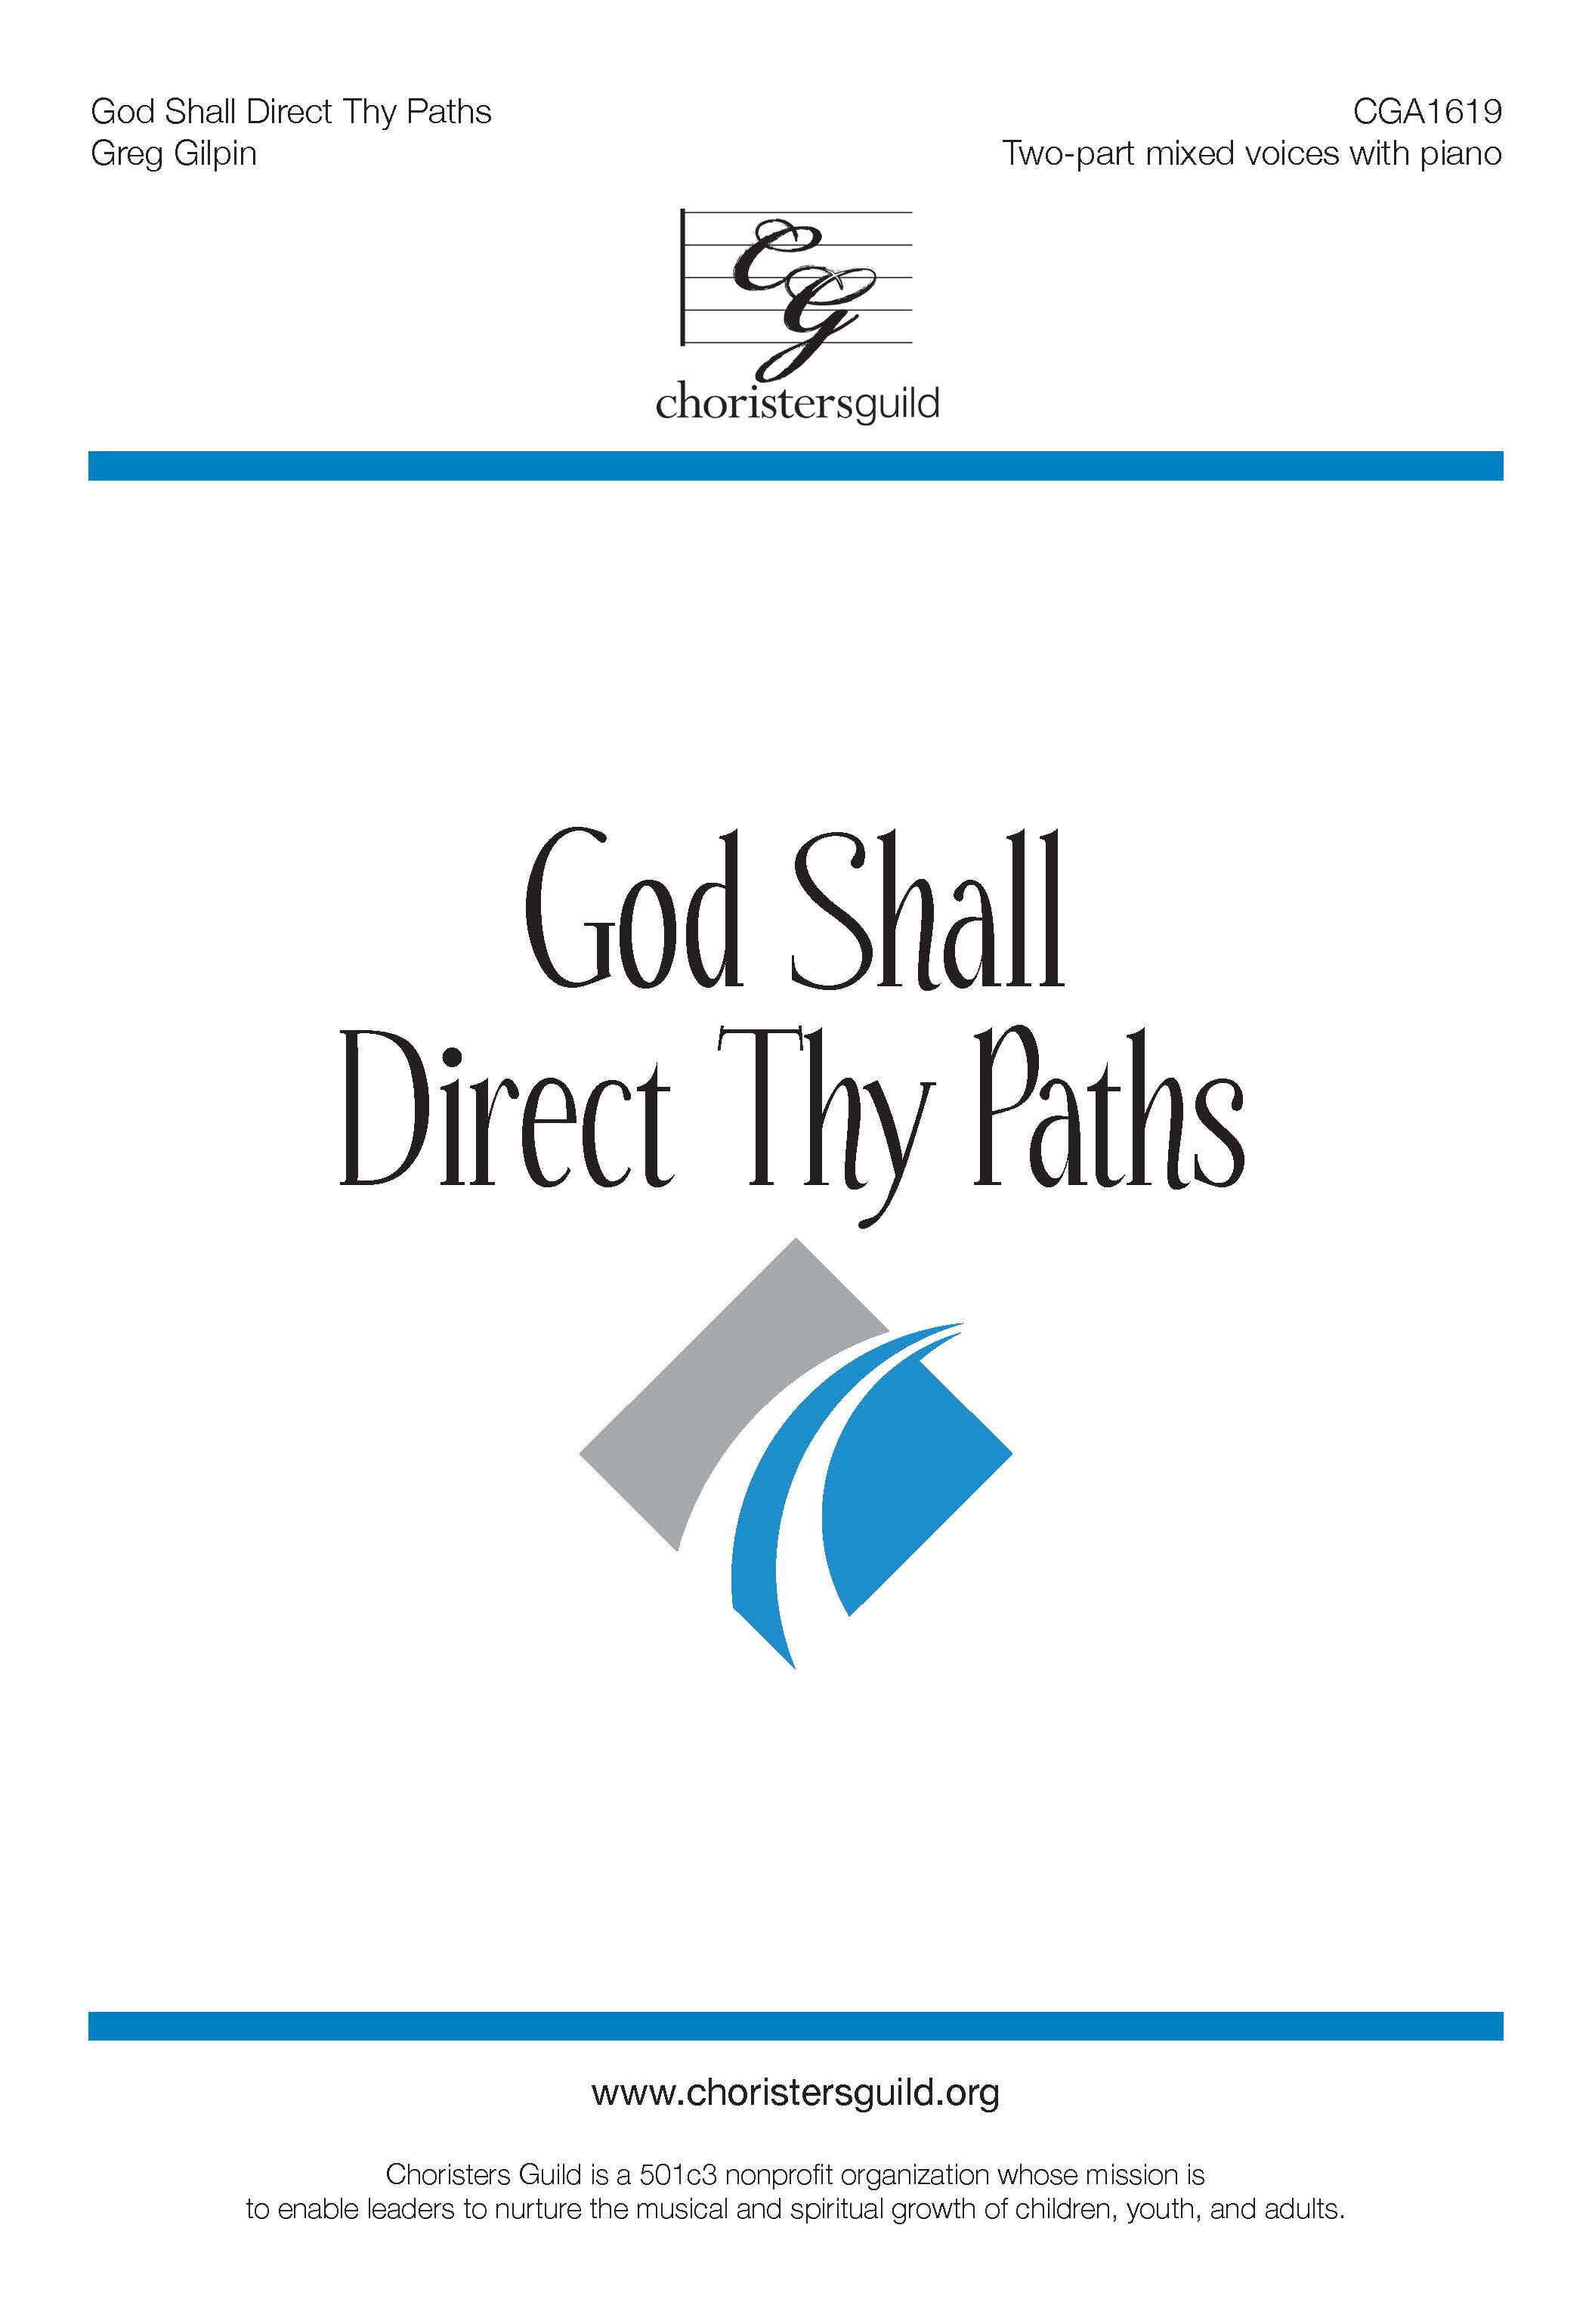 God Shall Direct Thy Paths - Two-part mixed